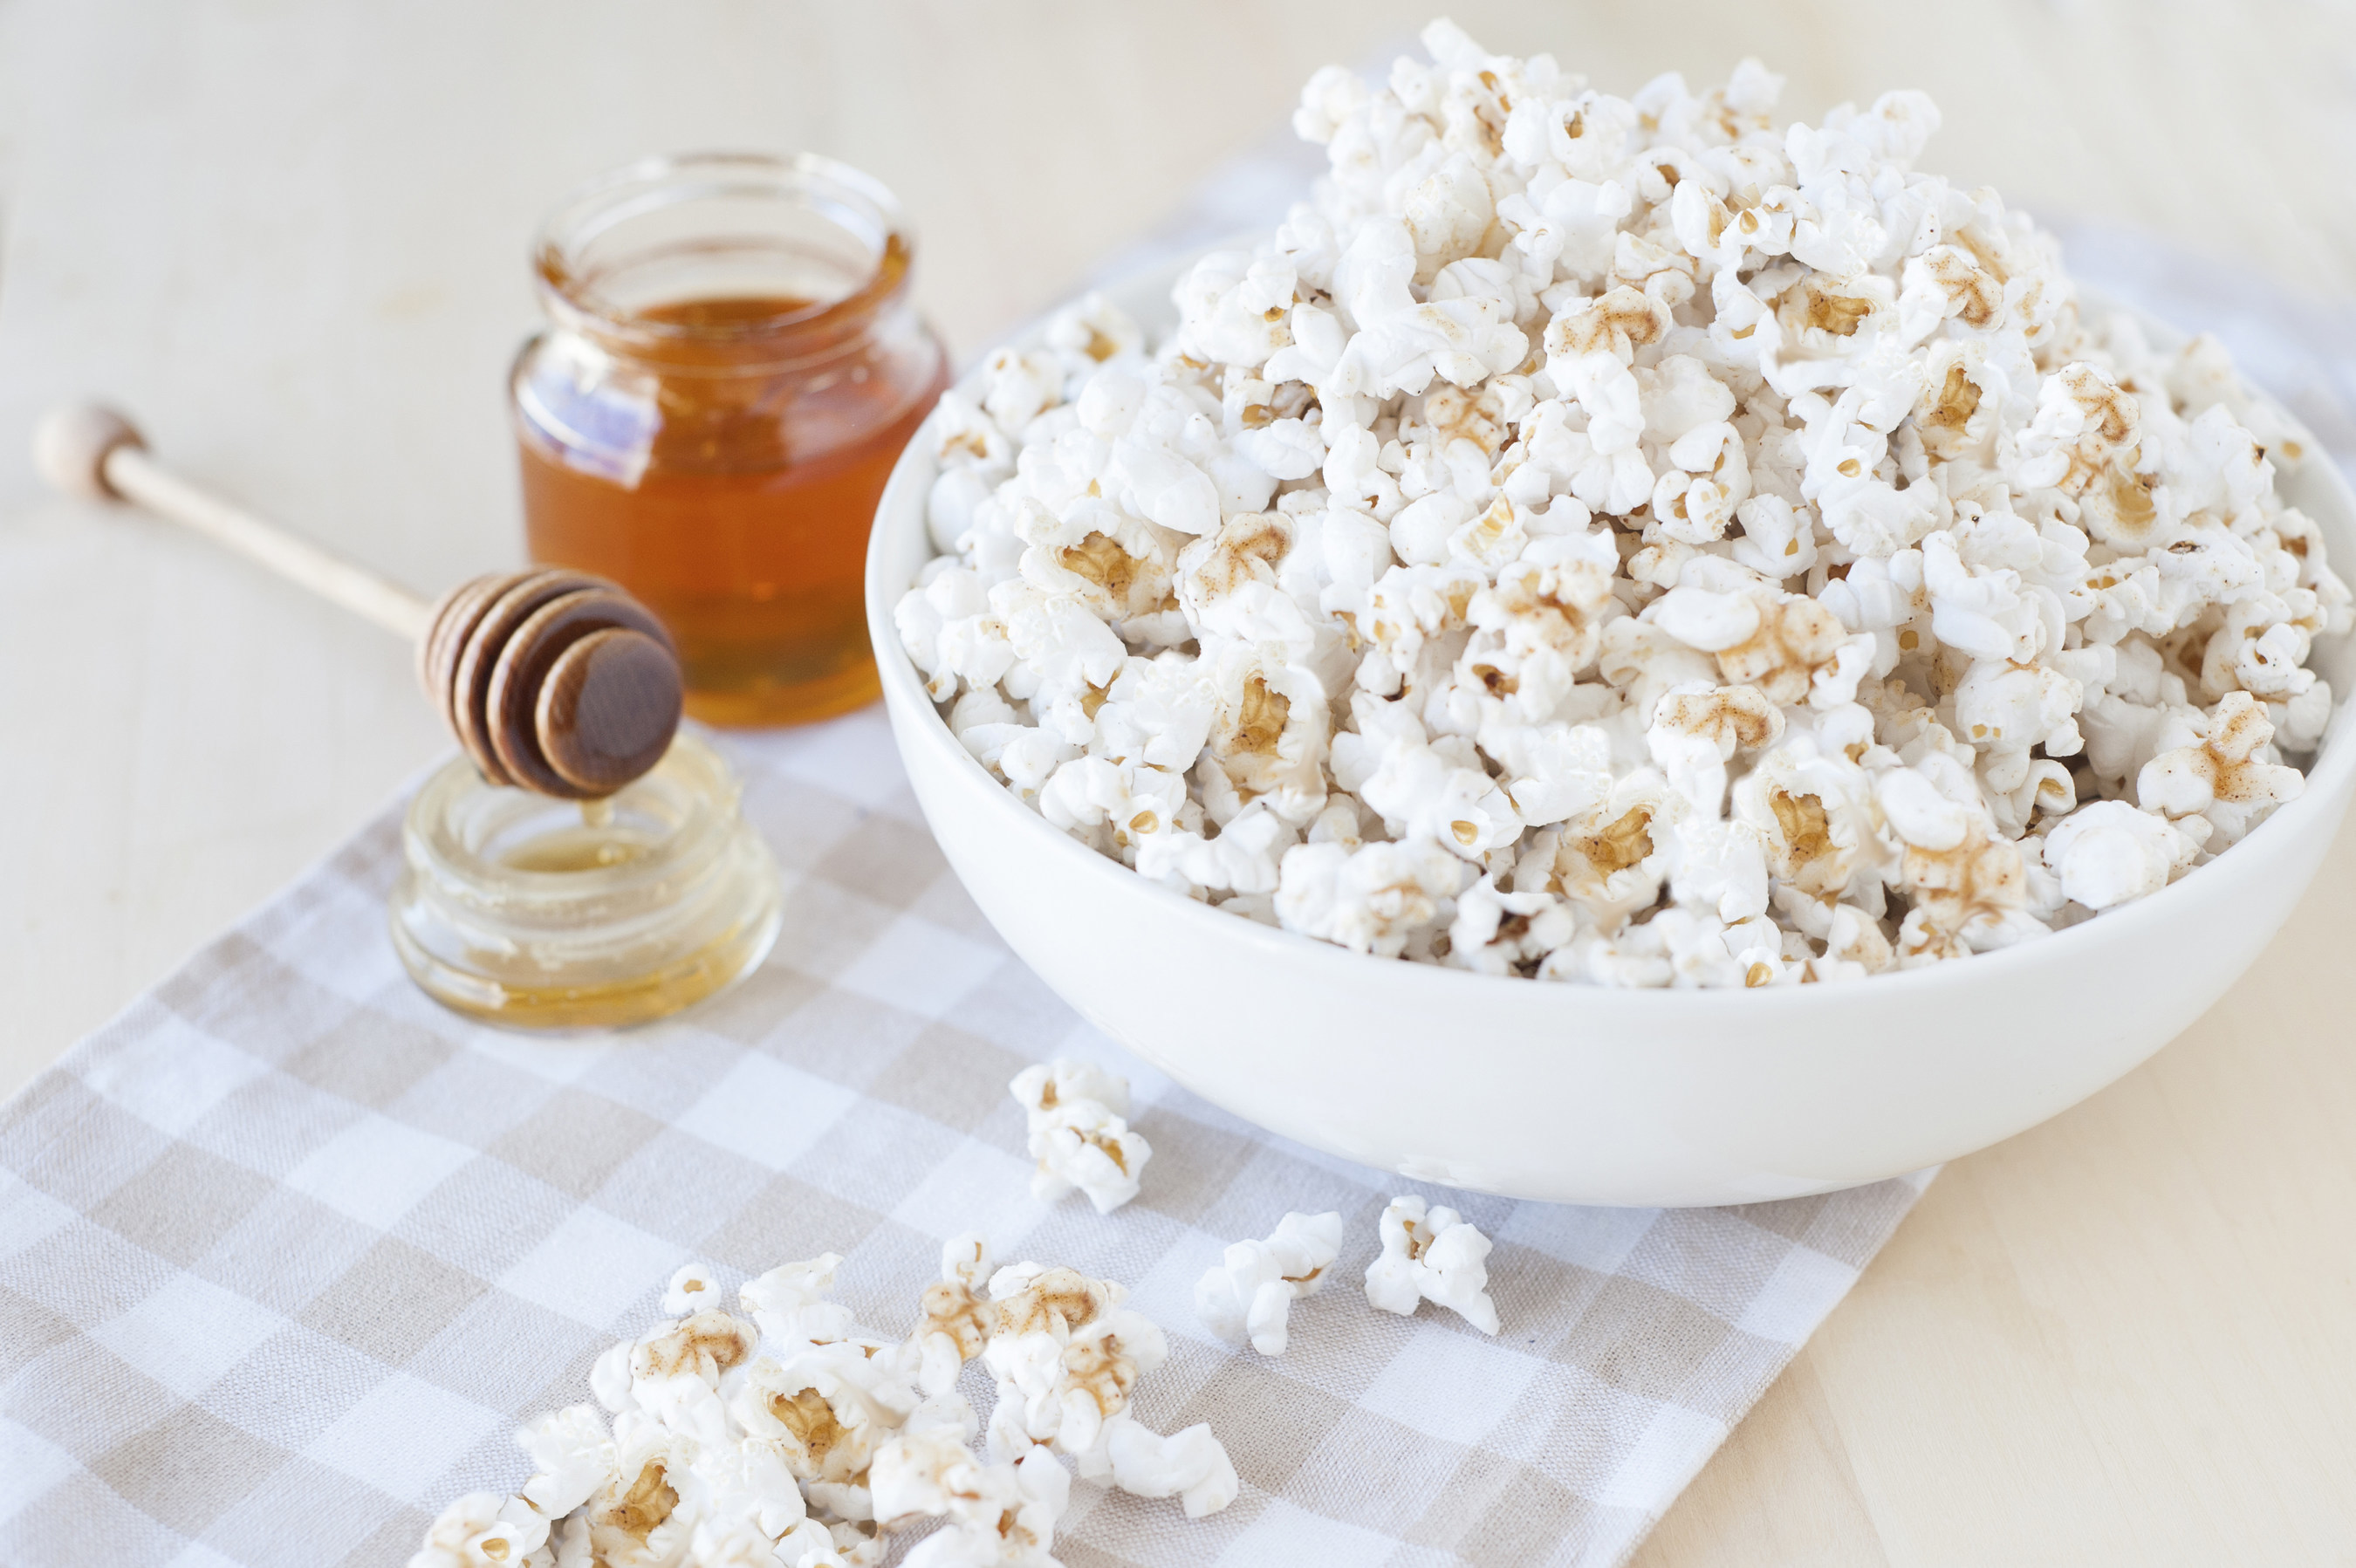 This is no ordinary popcorn. This Safari Honey-Butter-Cinnamon Popcorn is the ultimate movie-time (or anytime) snack! Courtesy: National Honey Board